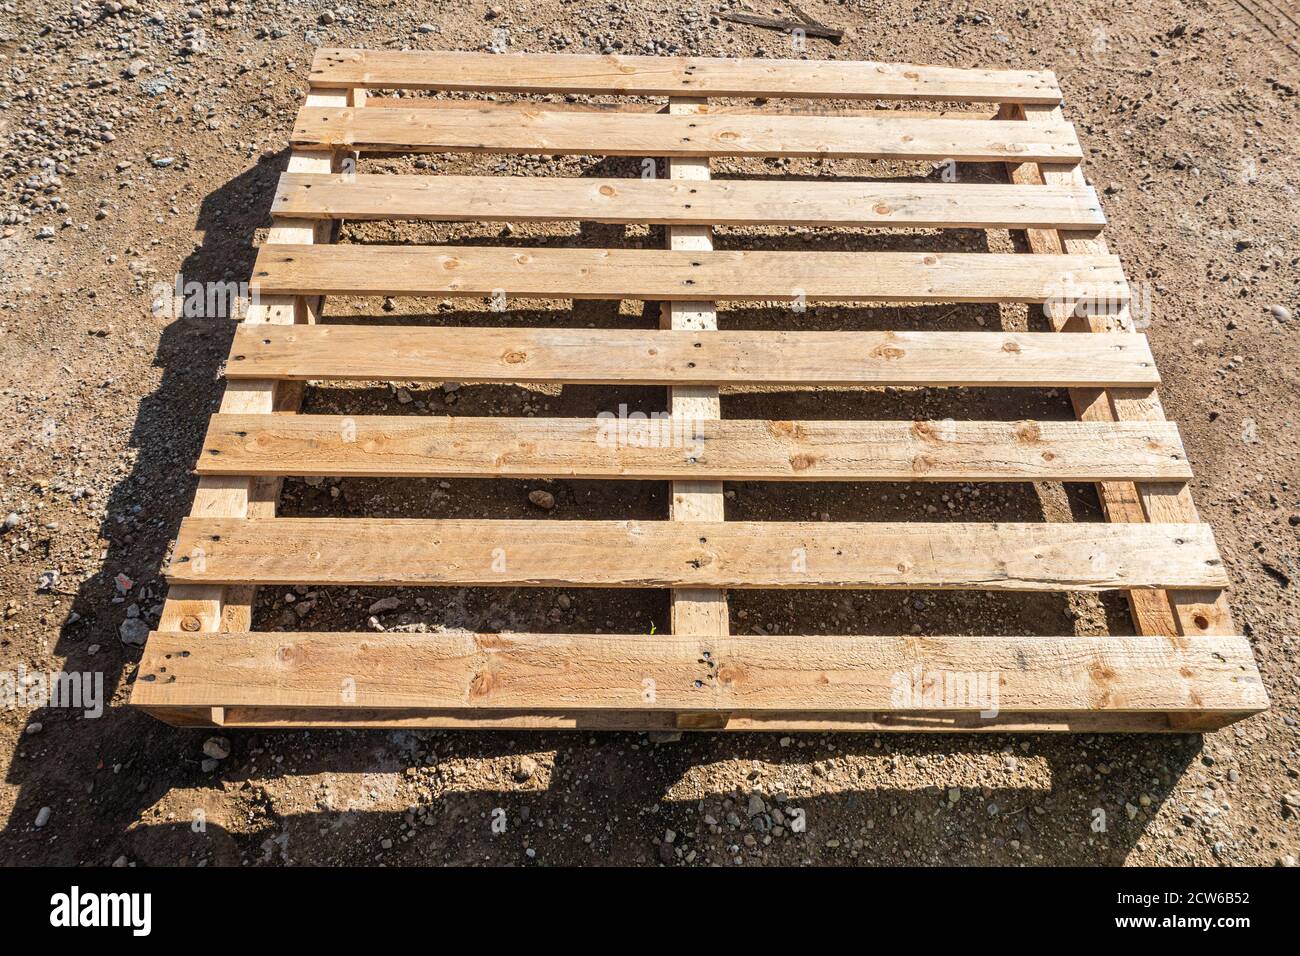 fumigated and heat treated shipping wooden pallet Stock Photo